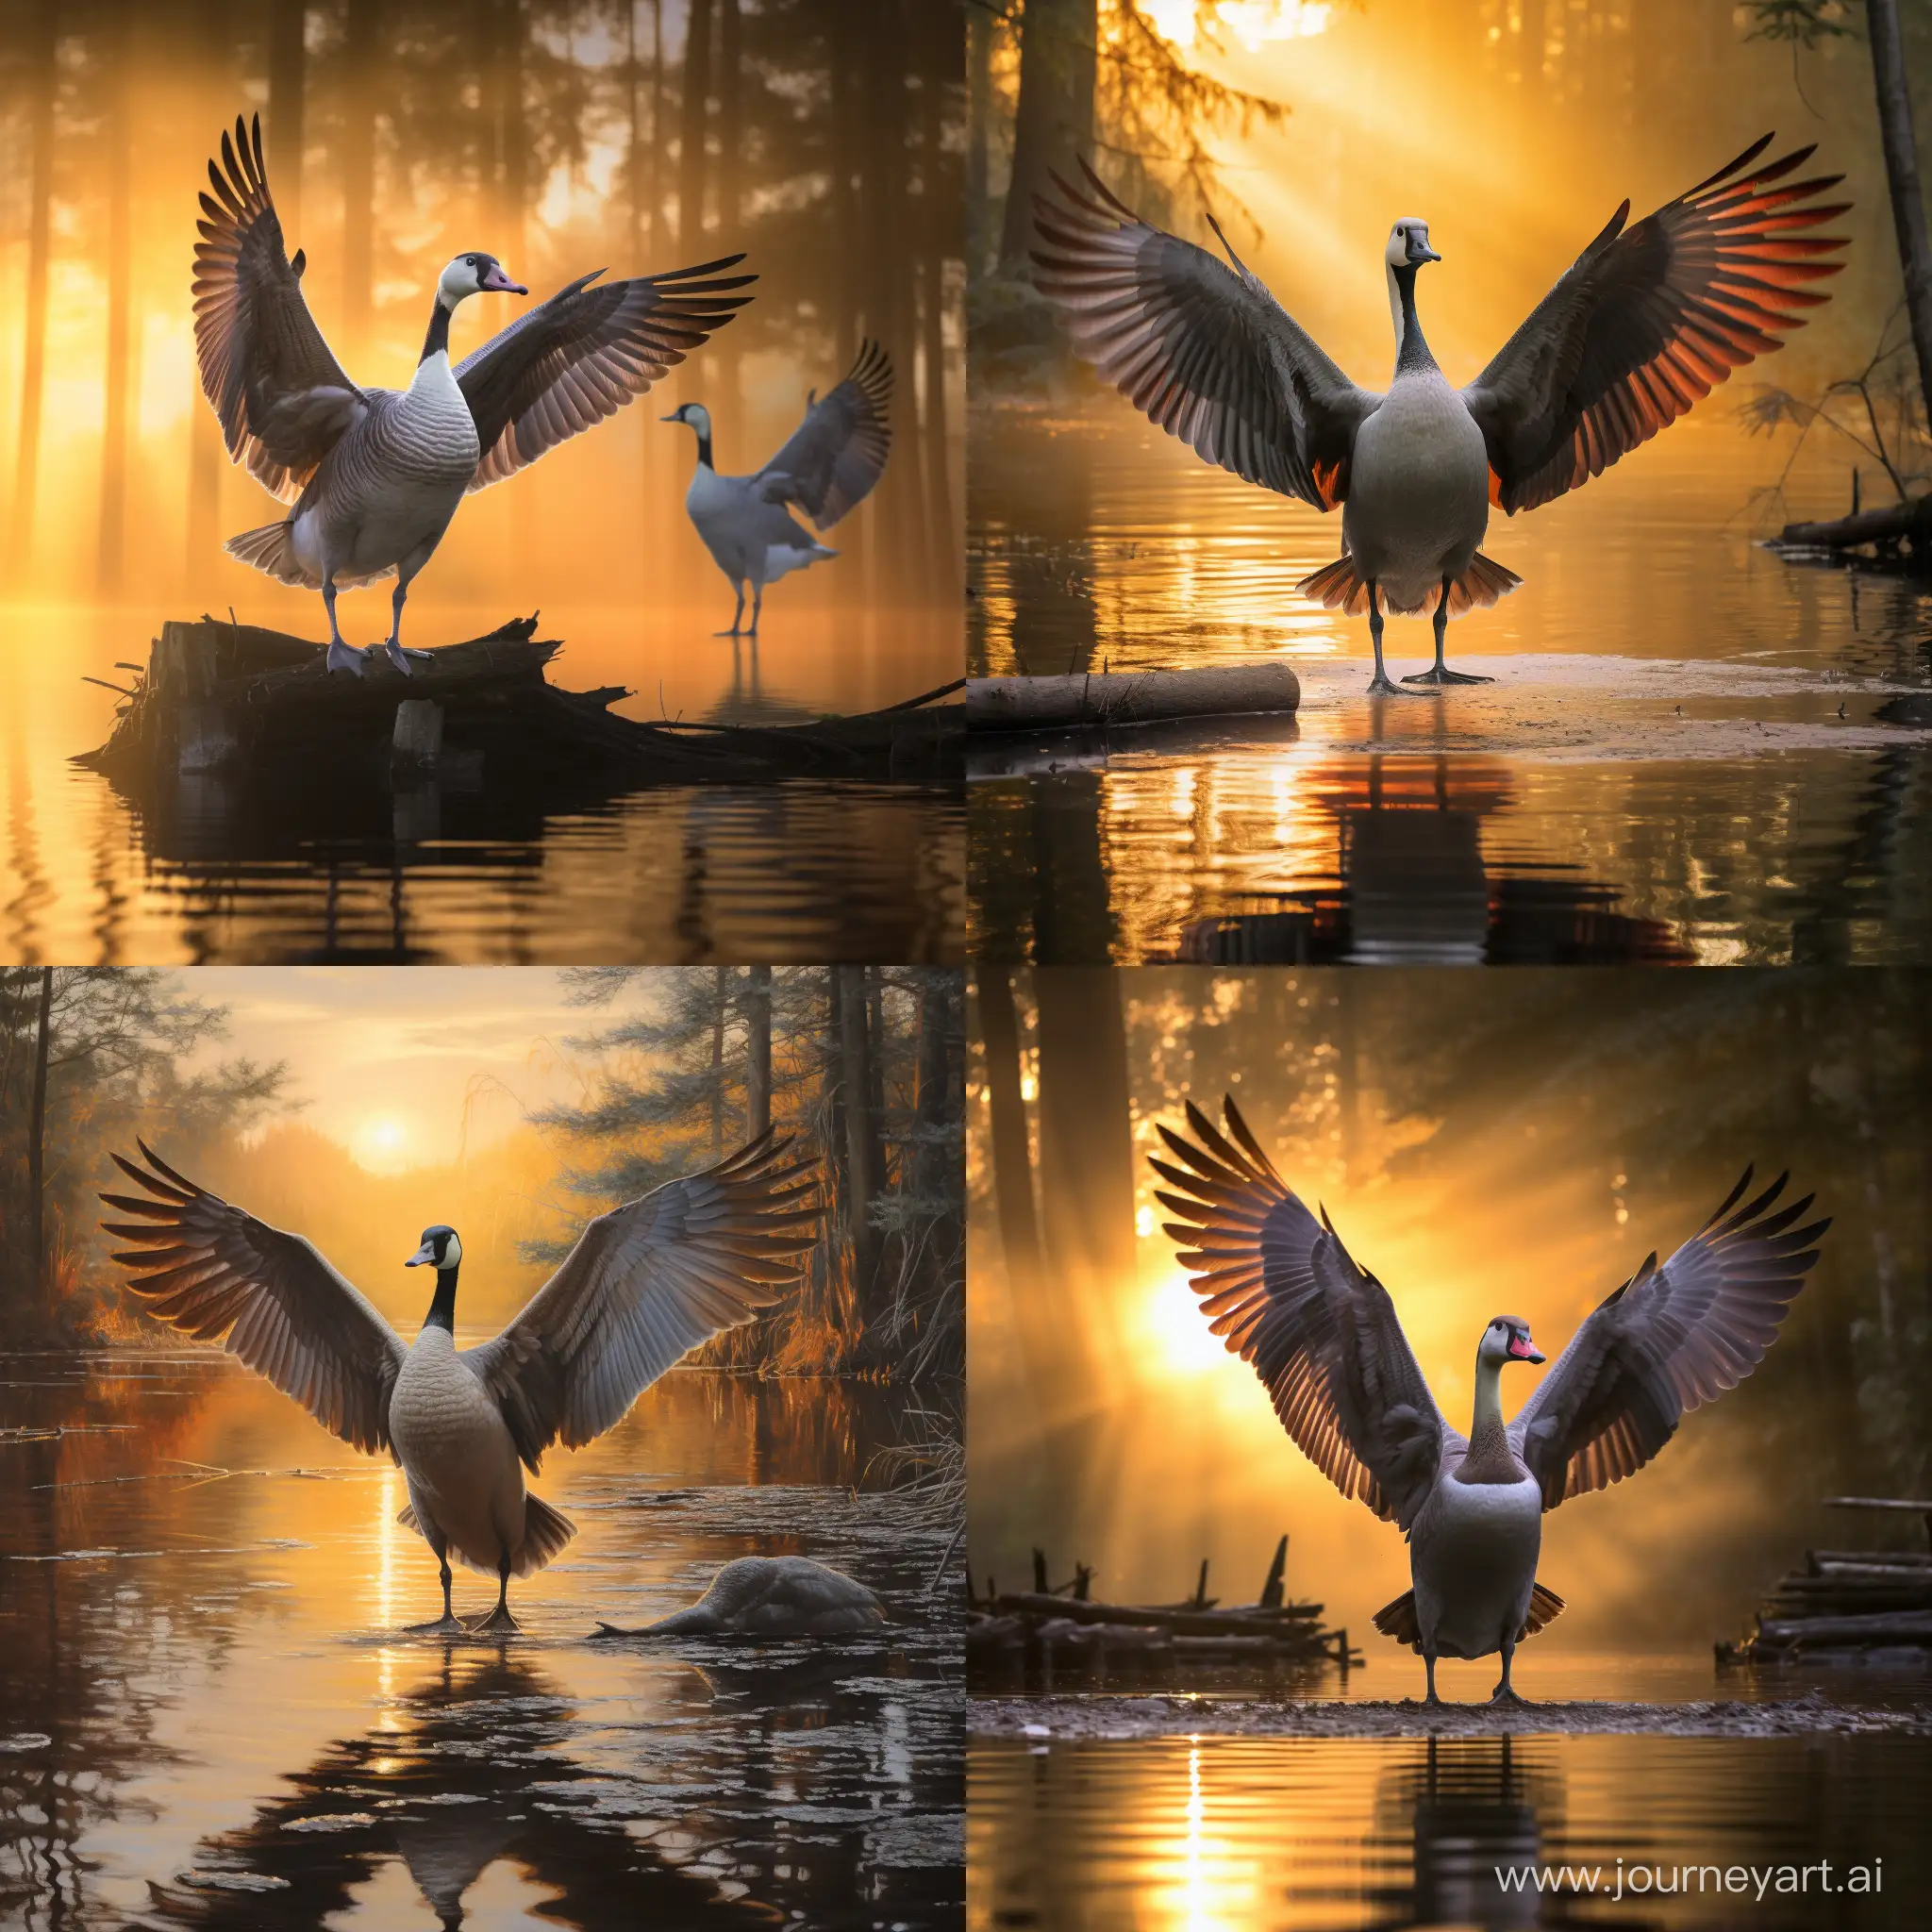 Dawn-Elegance-Majestic-Goose-and-Industrious-Beaver-in-Forest-Harmony